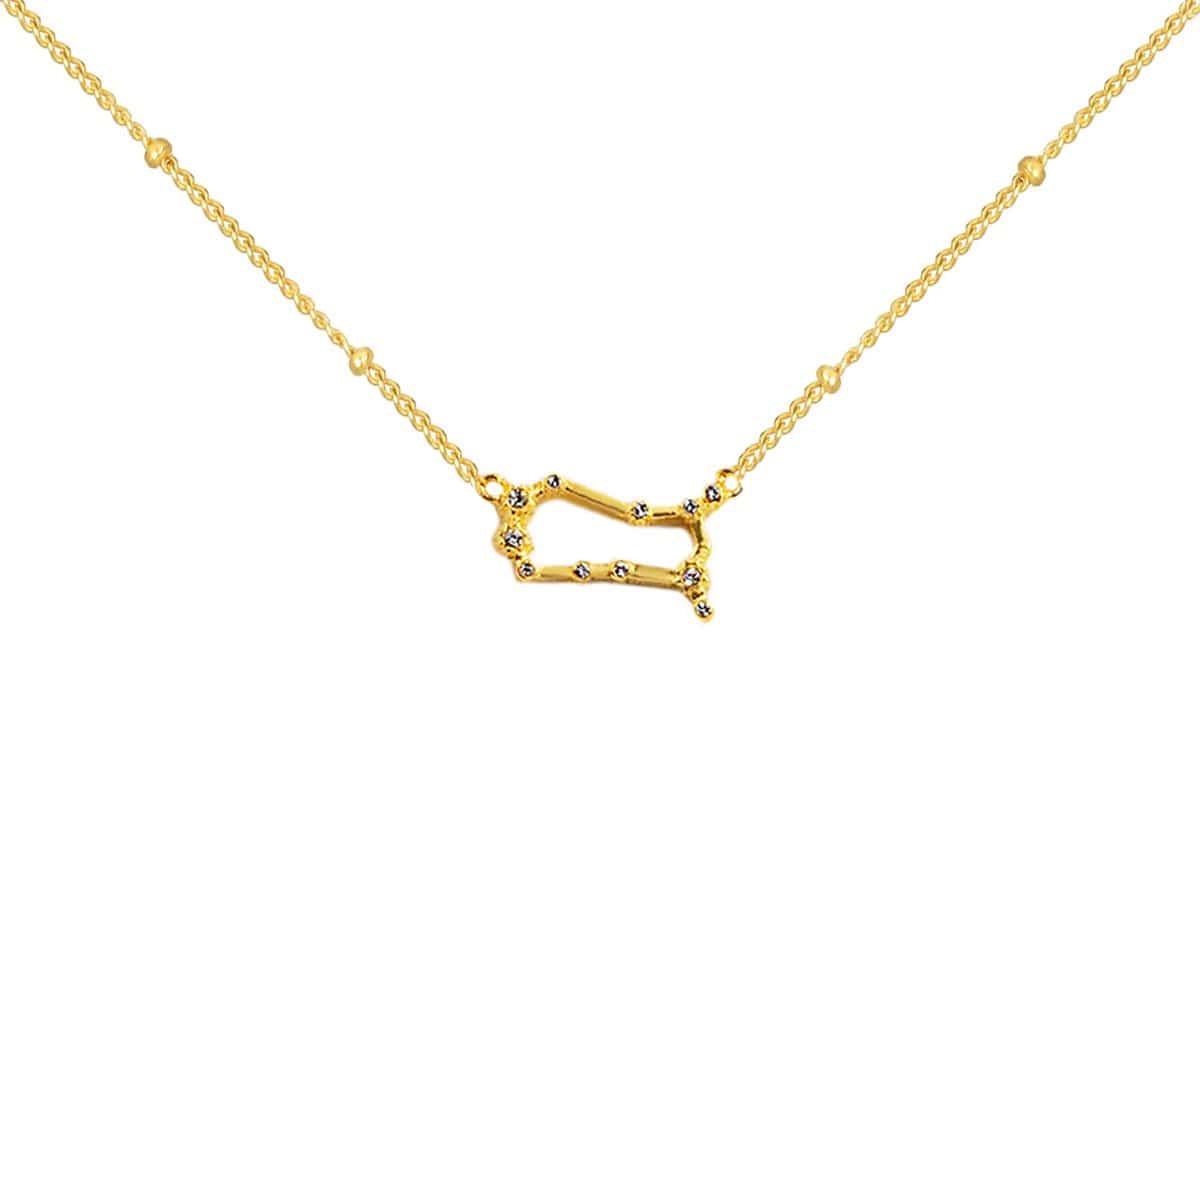 Karma and Luck  Necklace  -  Single Intellectual Drift - Gemini Constellation Necklace